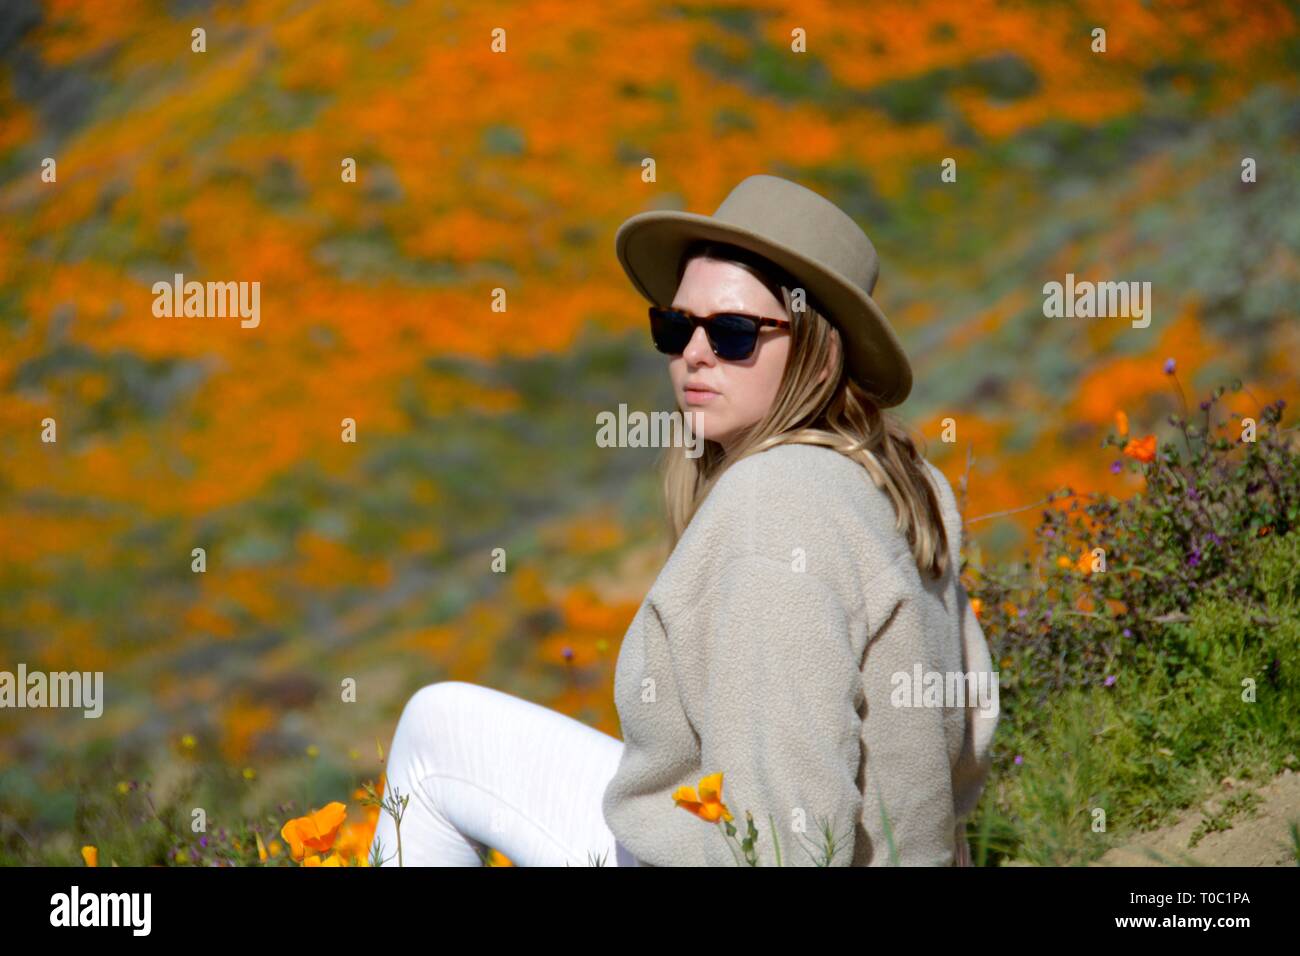 Super Bloom 2019. Woman disobeys the rules and sits on the golden poppies—crushing them—in her quest for photos at the now-closed Walker Canyon. Stock Photo